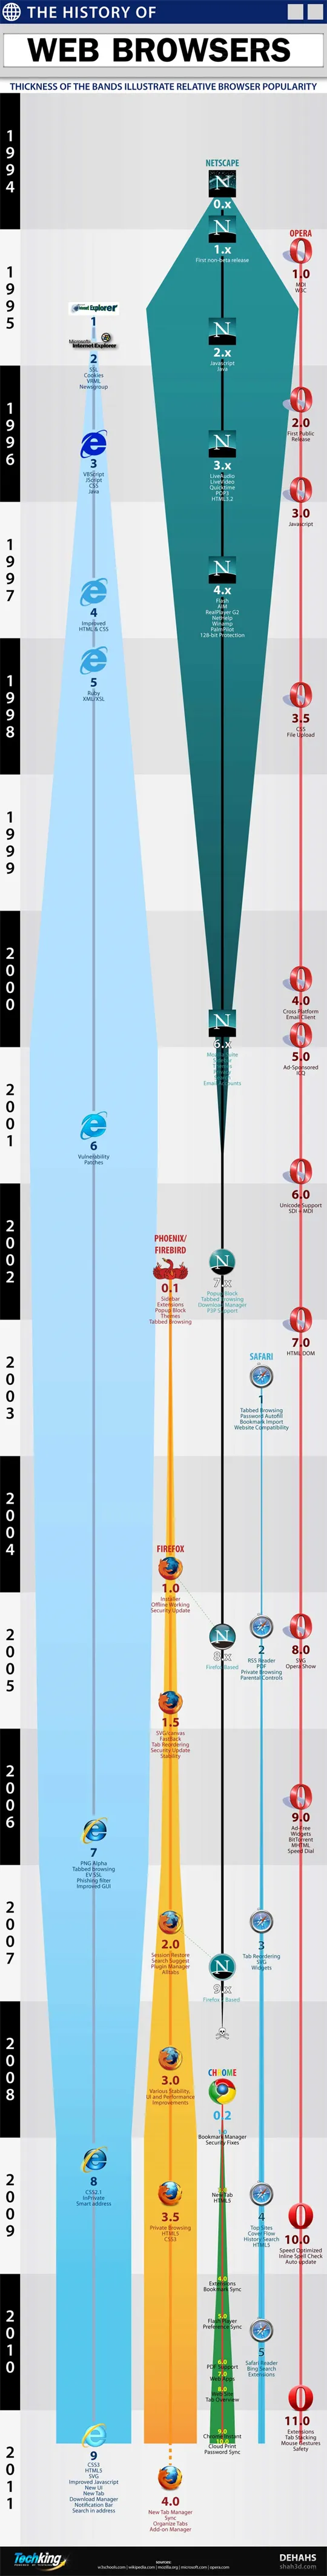 The Evolution Of Web Browsers (Infographic) 1